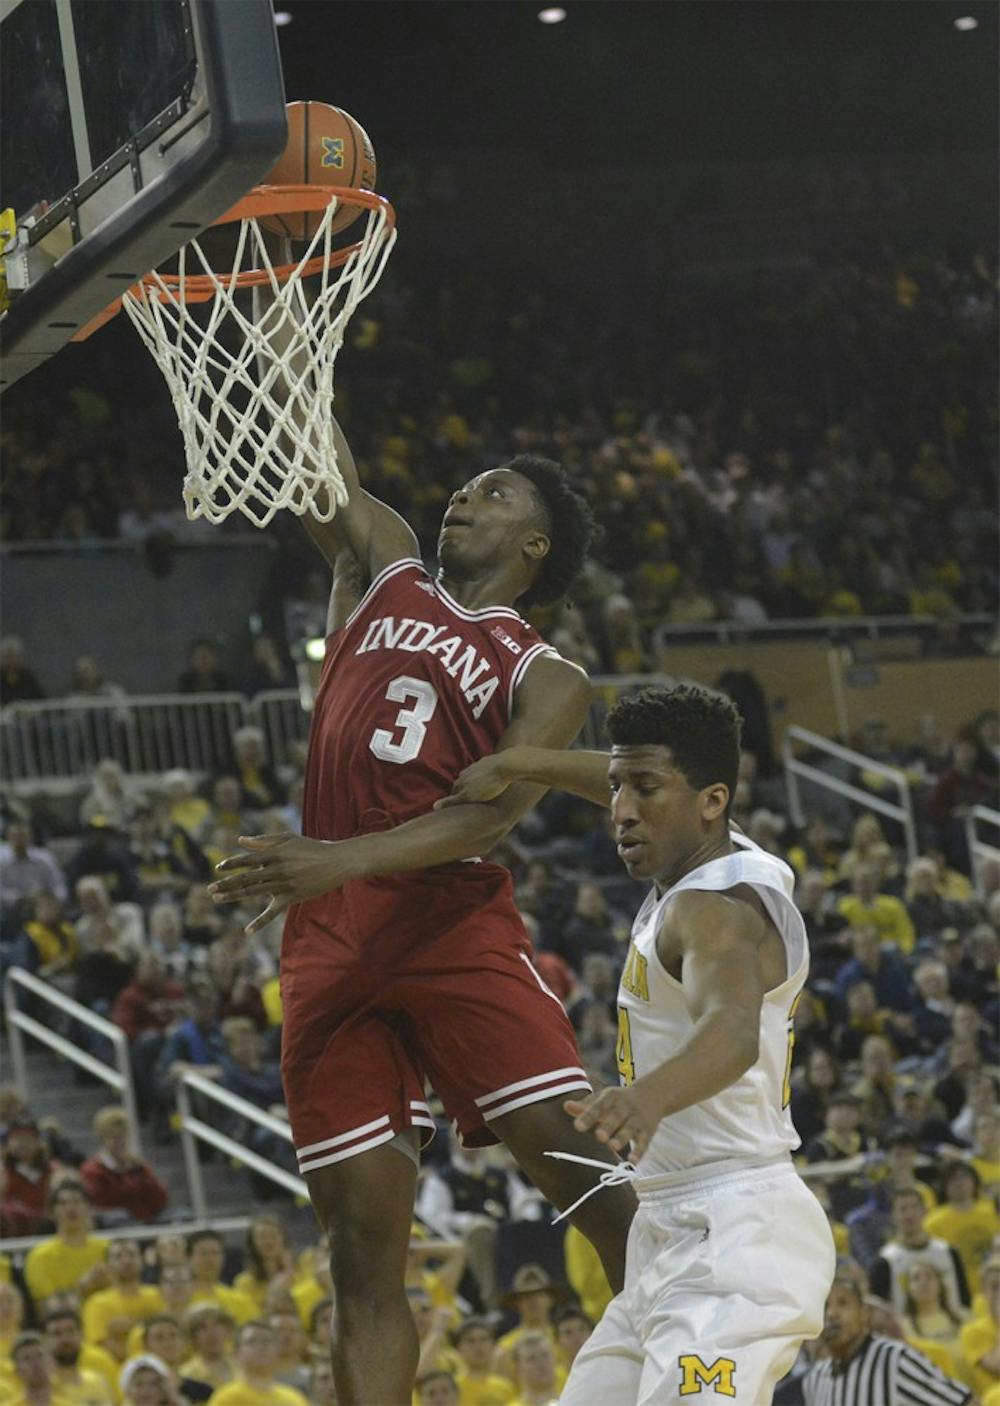 Freshman forward O.G. Anunoby dunks during the game against Michigan on Tuesday at Crisler Center in Ann Arbor, Mich.